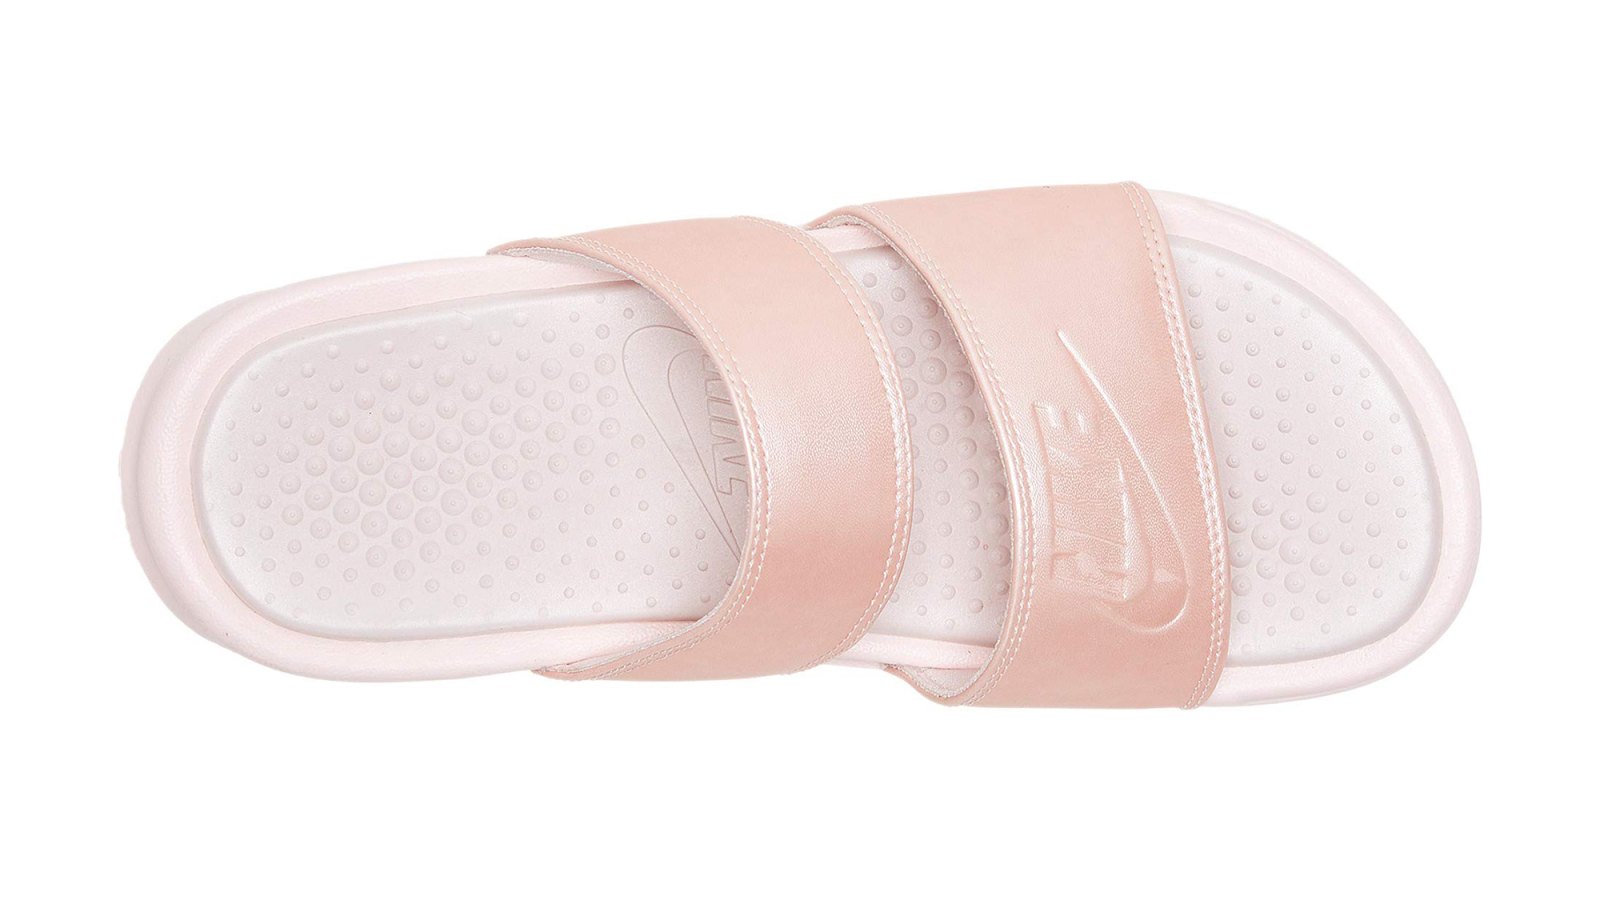 These Top-Rated Nike Sandals Are Cuter Than Typical Slides